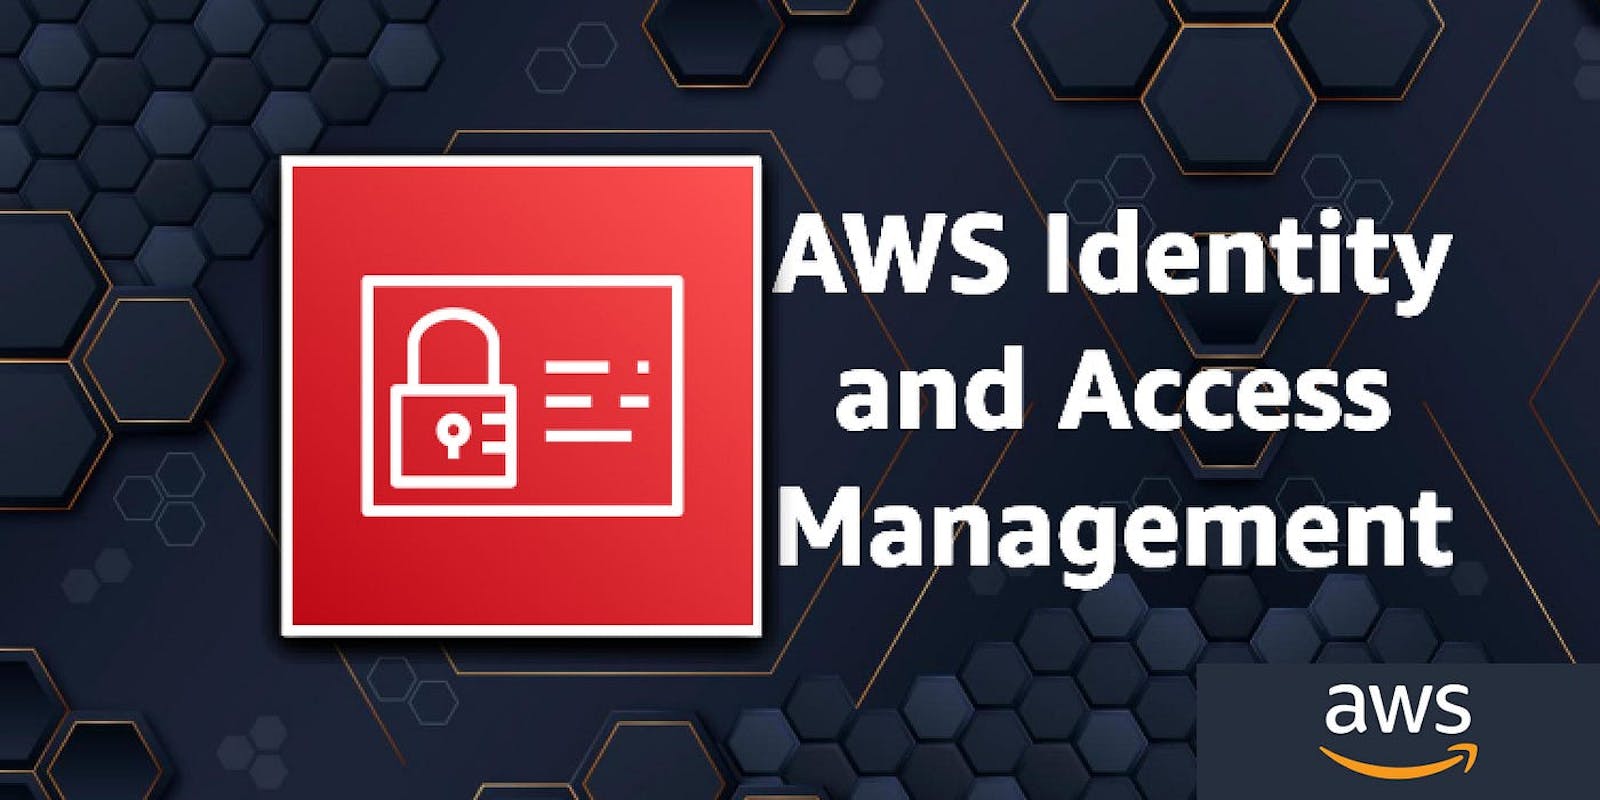 Day 39 - Exploring AWS and IAM Essentials in the Cloud! ☁️🛡️